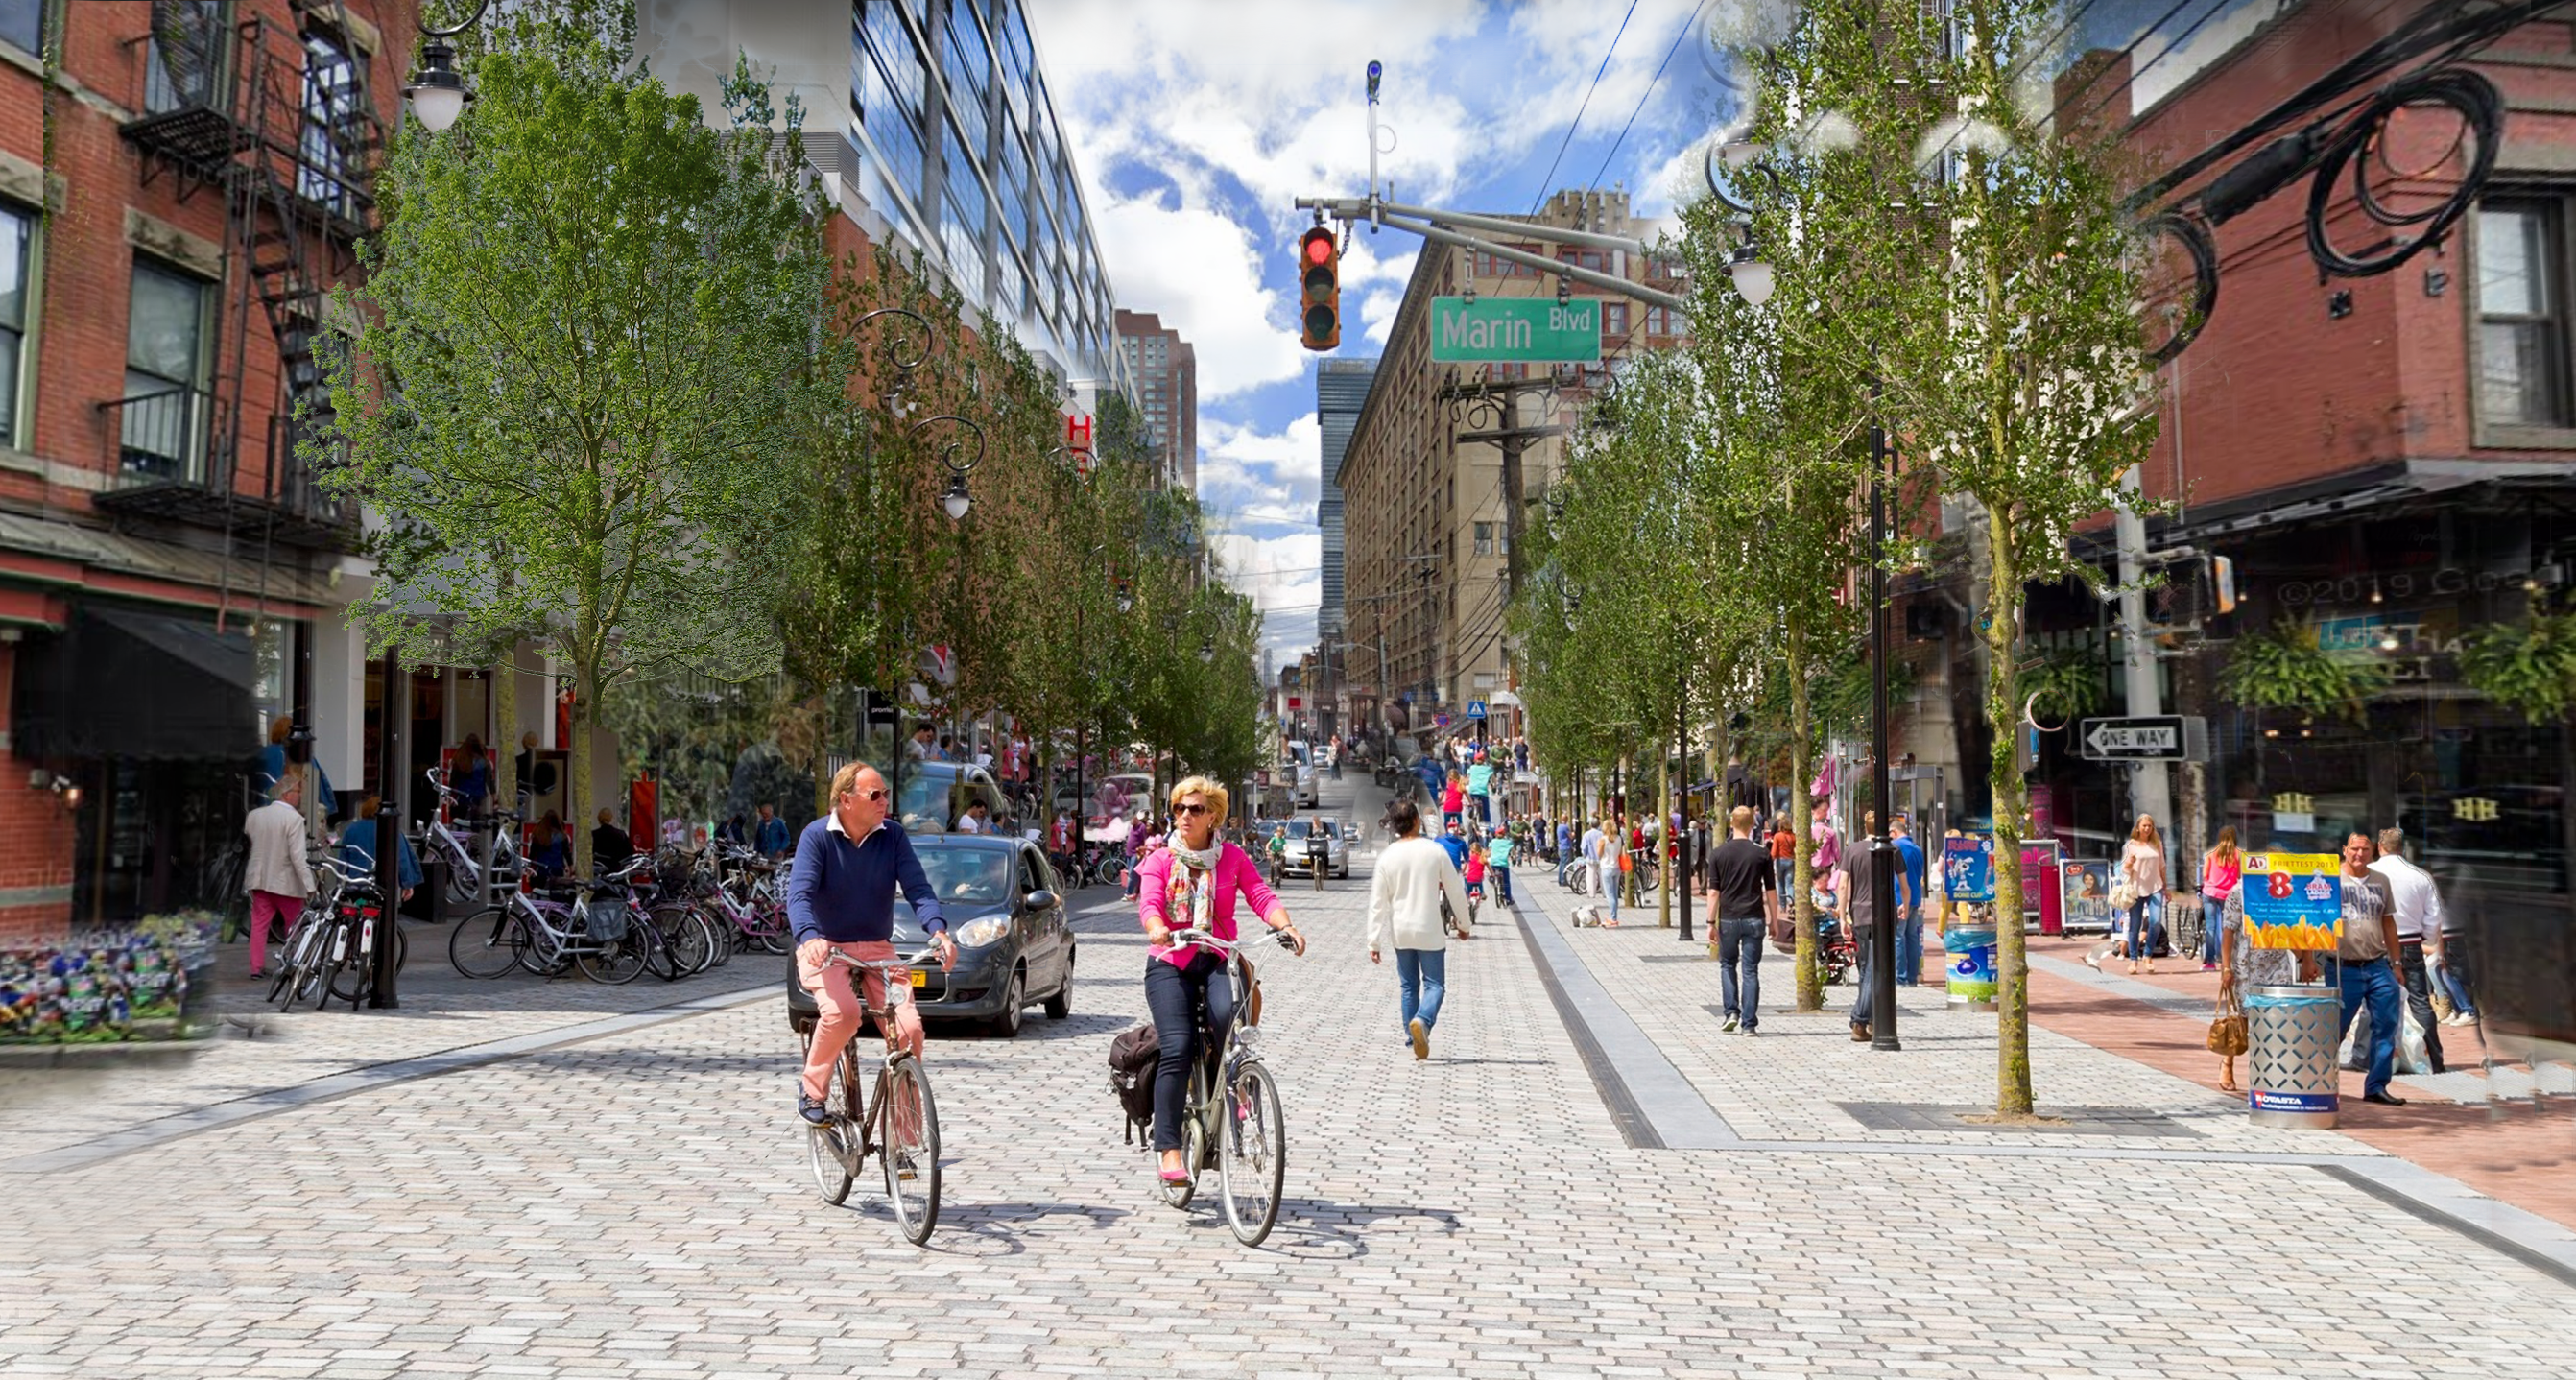 rendering of busy intersection, with retail shops in background, couple biking in foreground